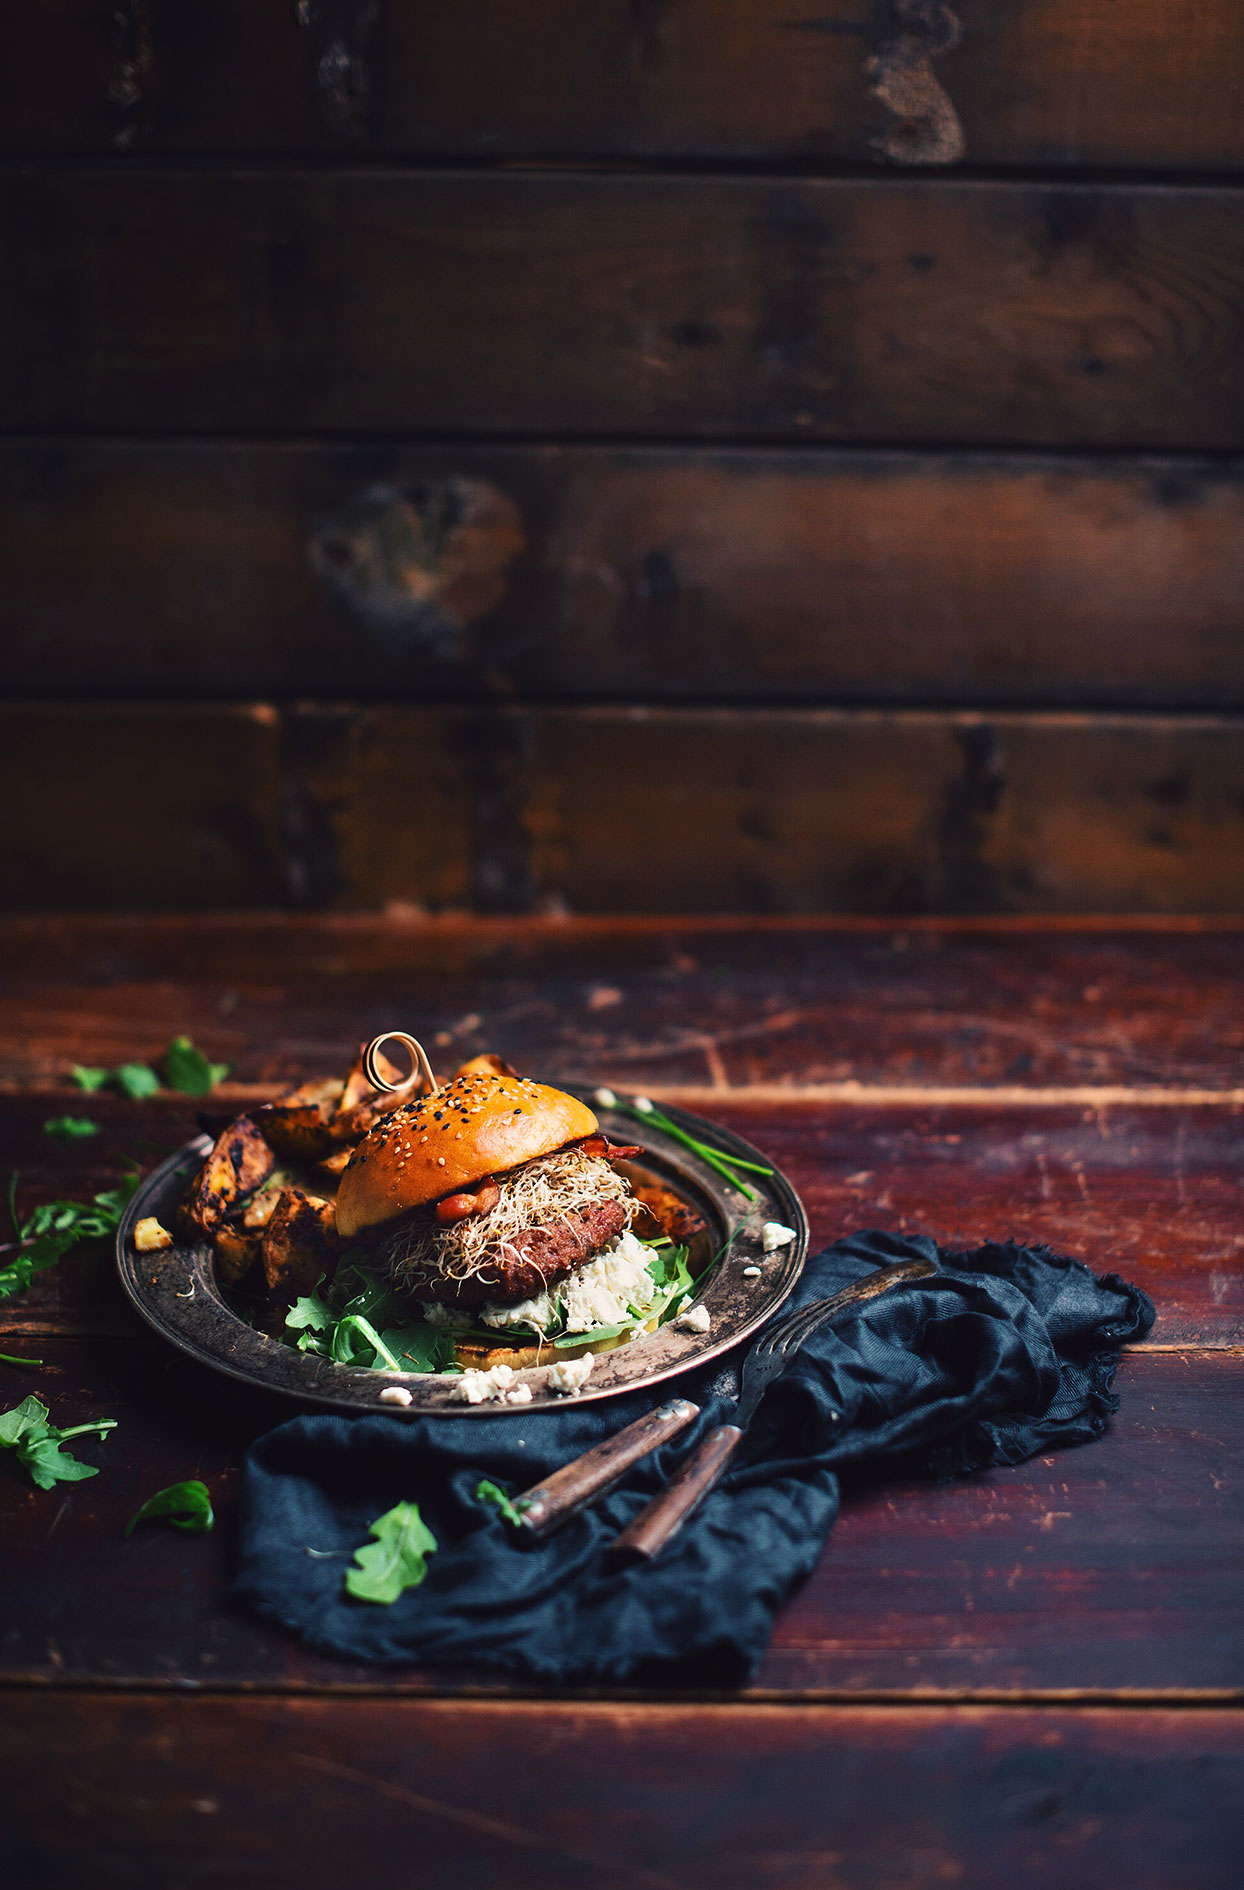 Lamb burger with bacon and goat cheese